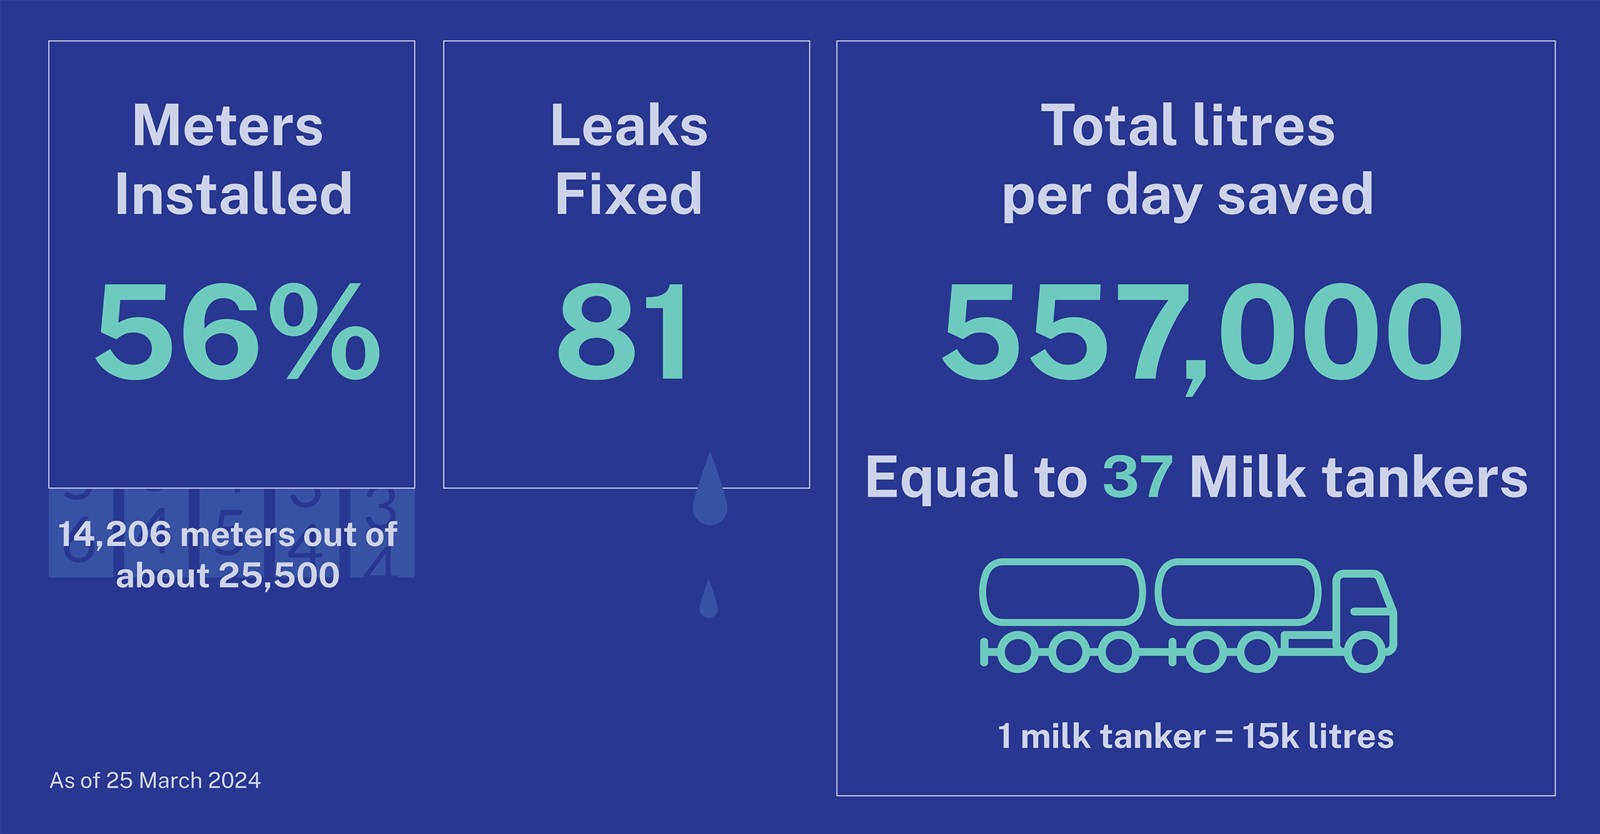 Water Meter Dashboard as of 25 March 2024.